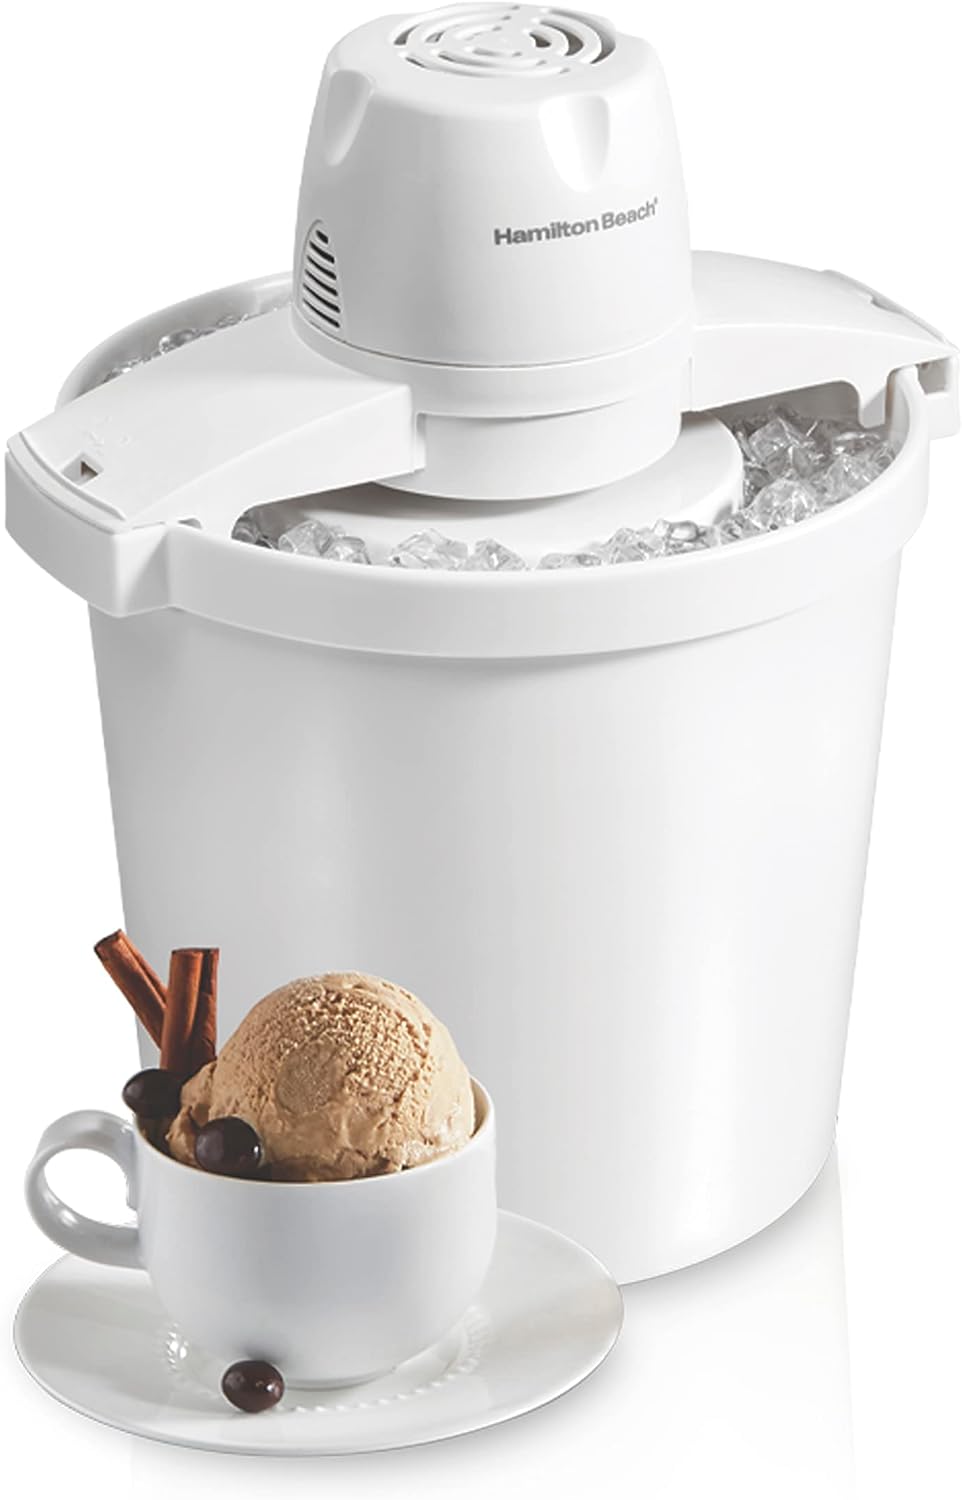 Make Delicious Ice Cream Easily: Recommend the Best Ice Cream Maker